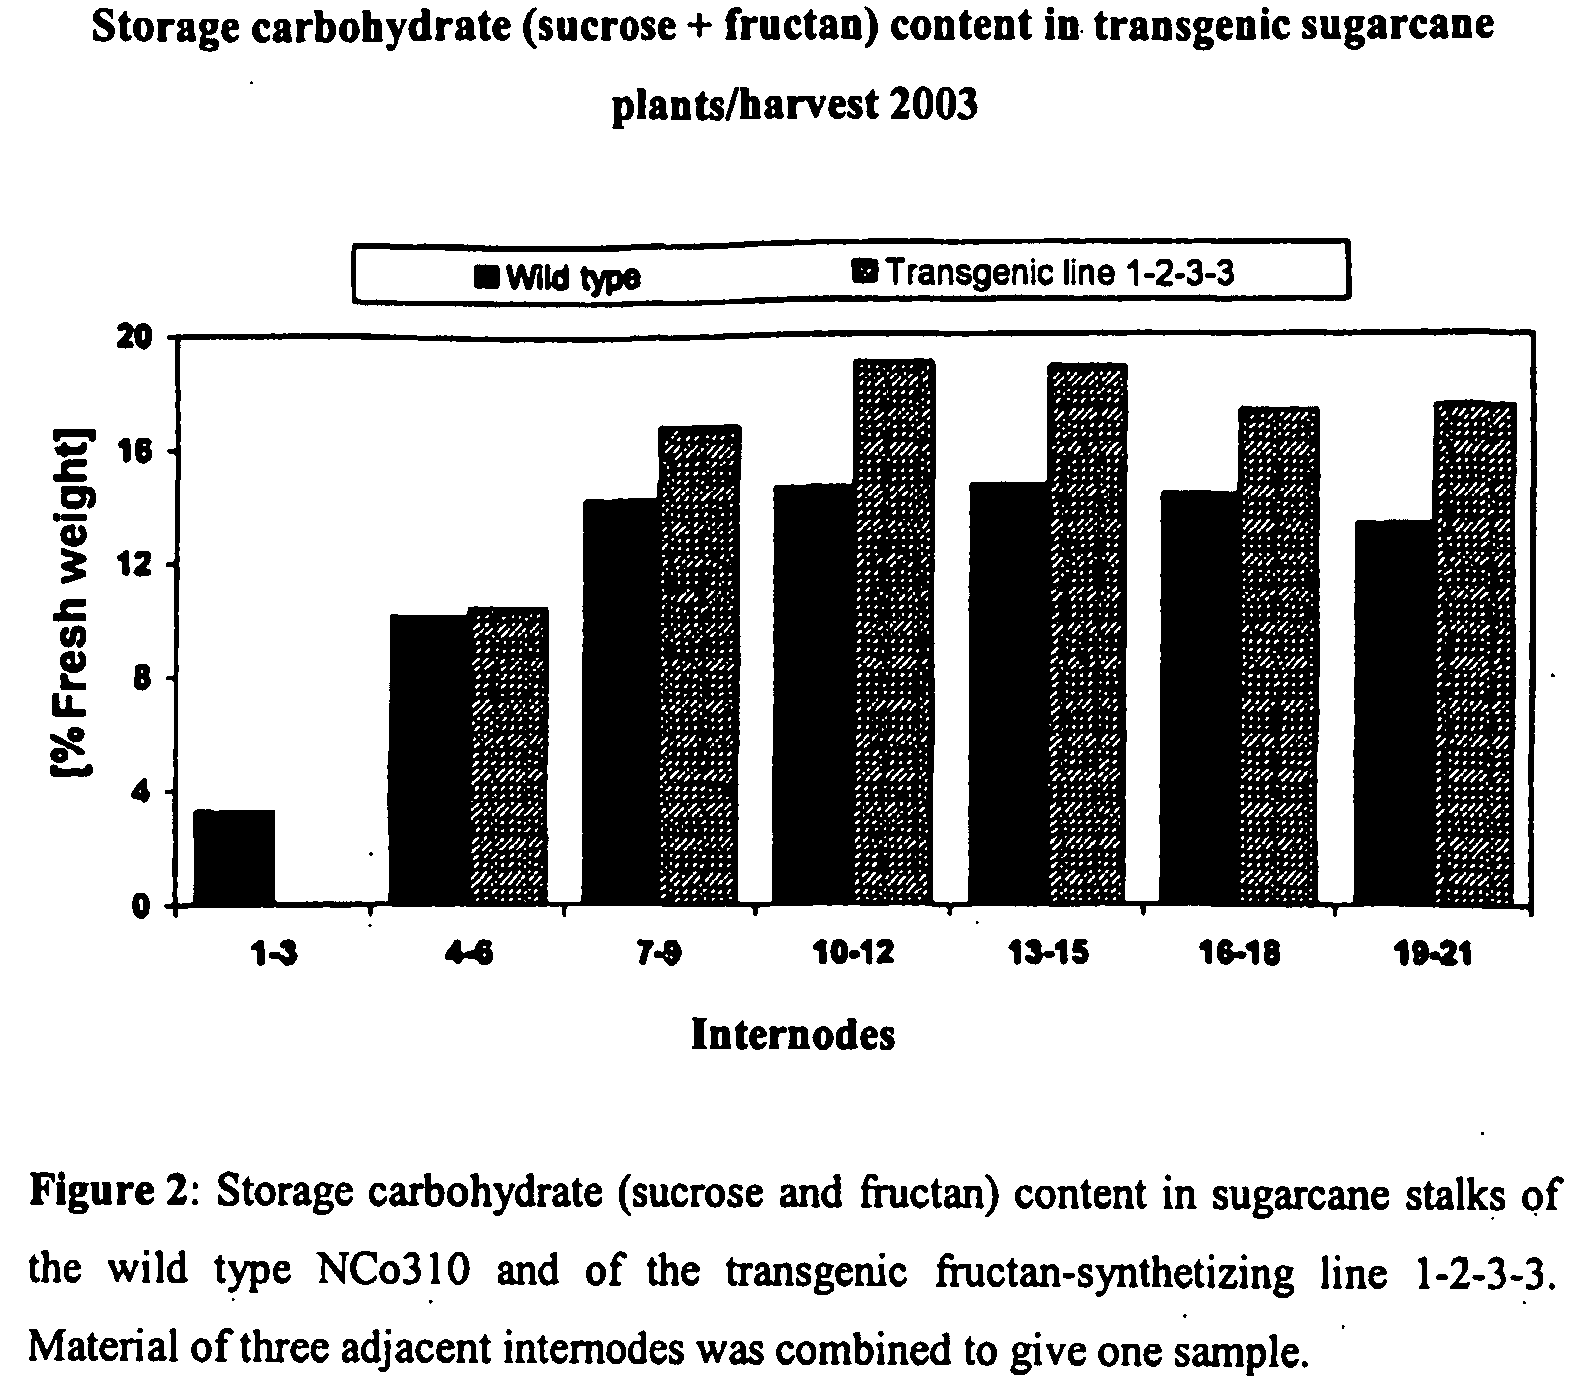 Sugarcane Plants with an Increased Storage Carbohydrate Content